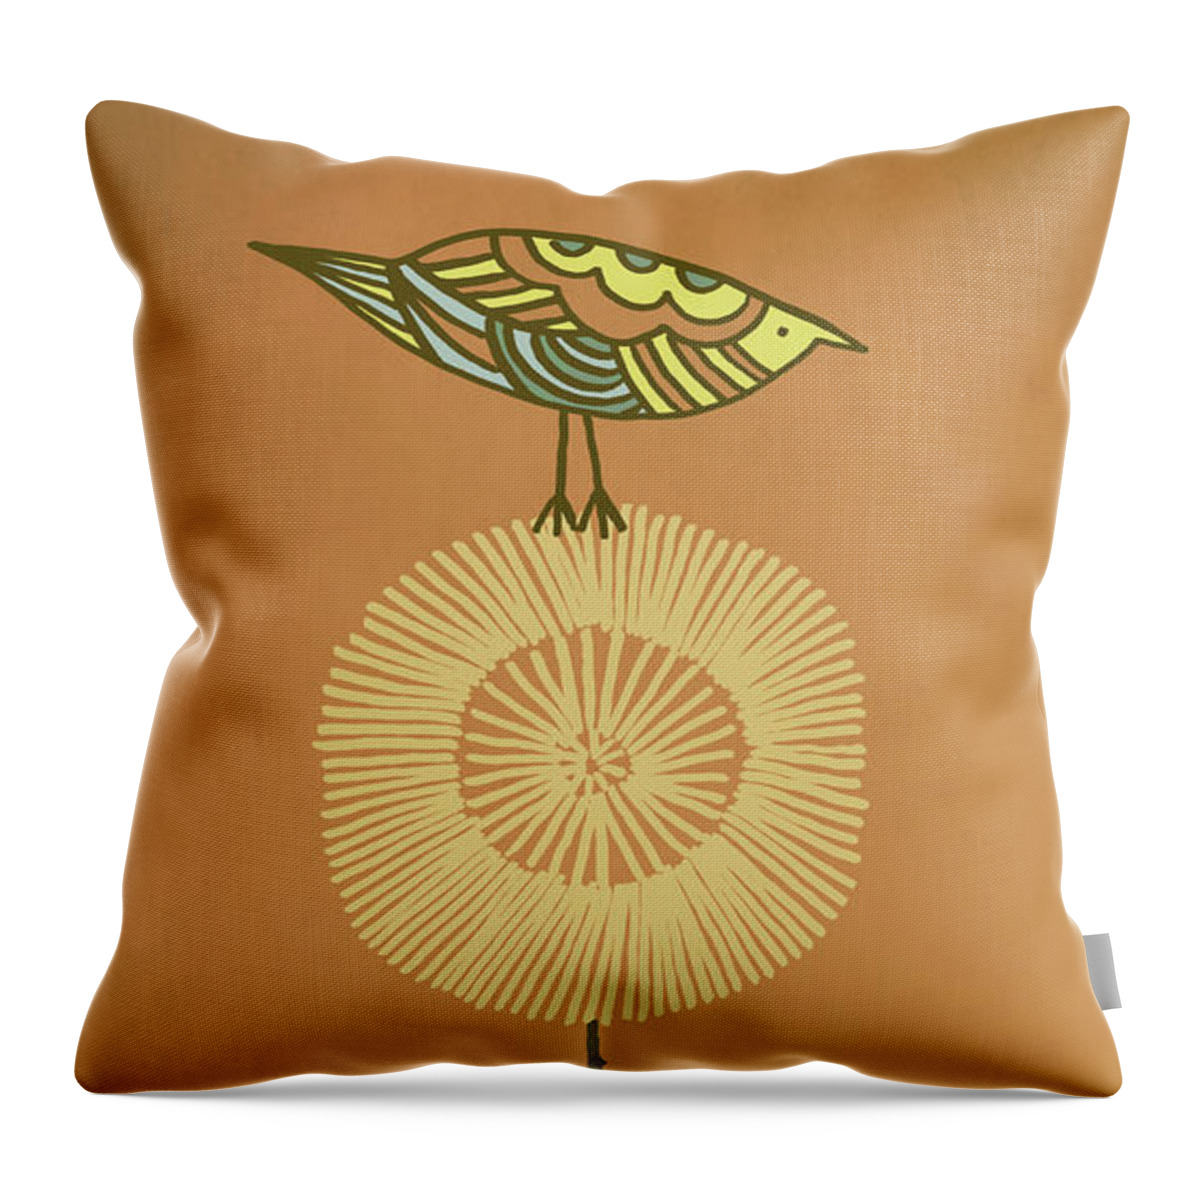 Bird Throw Pillow featuring the drawing Perch by Eric Fan